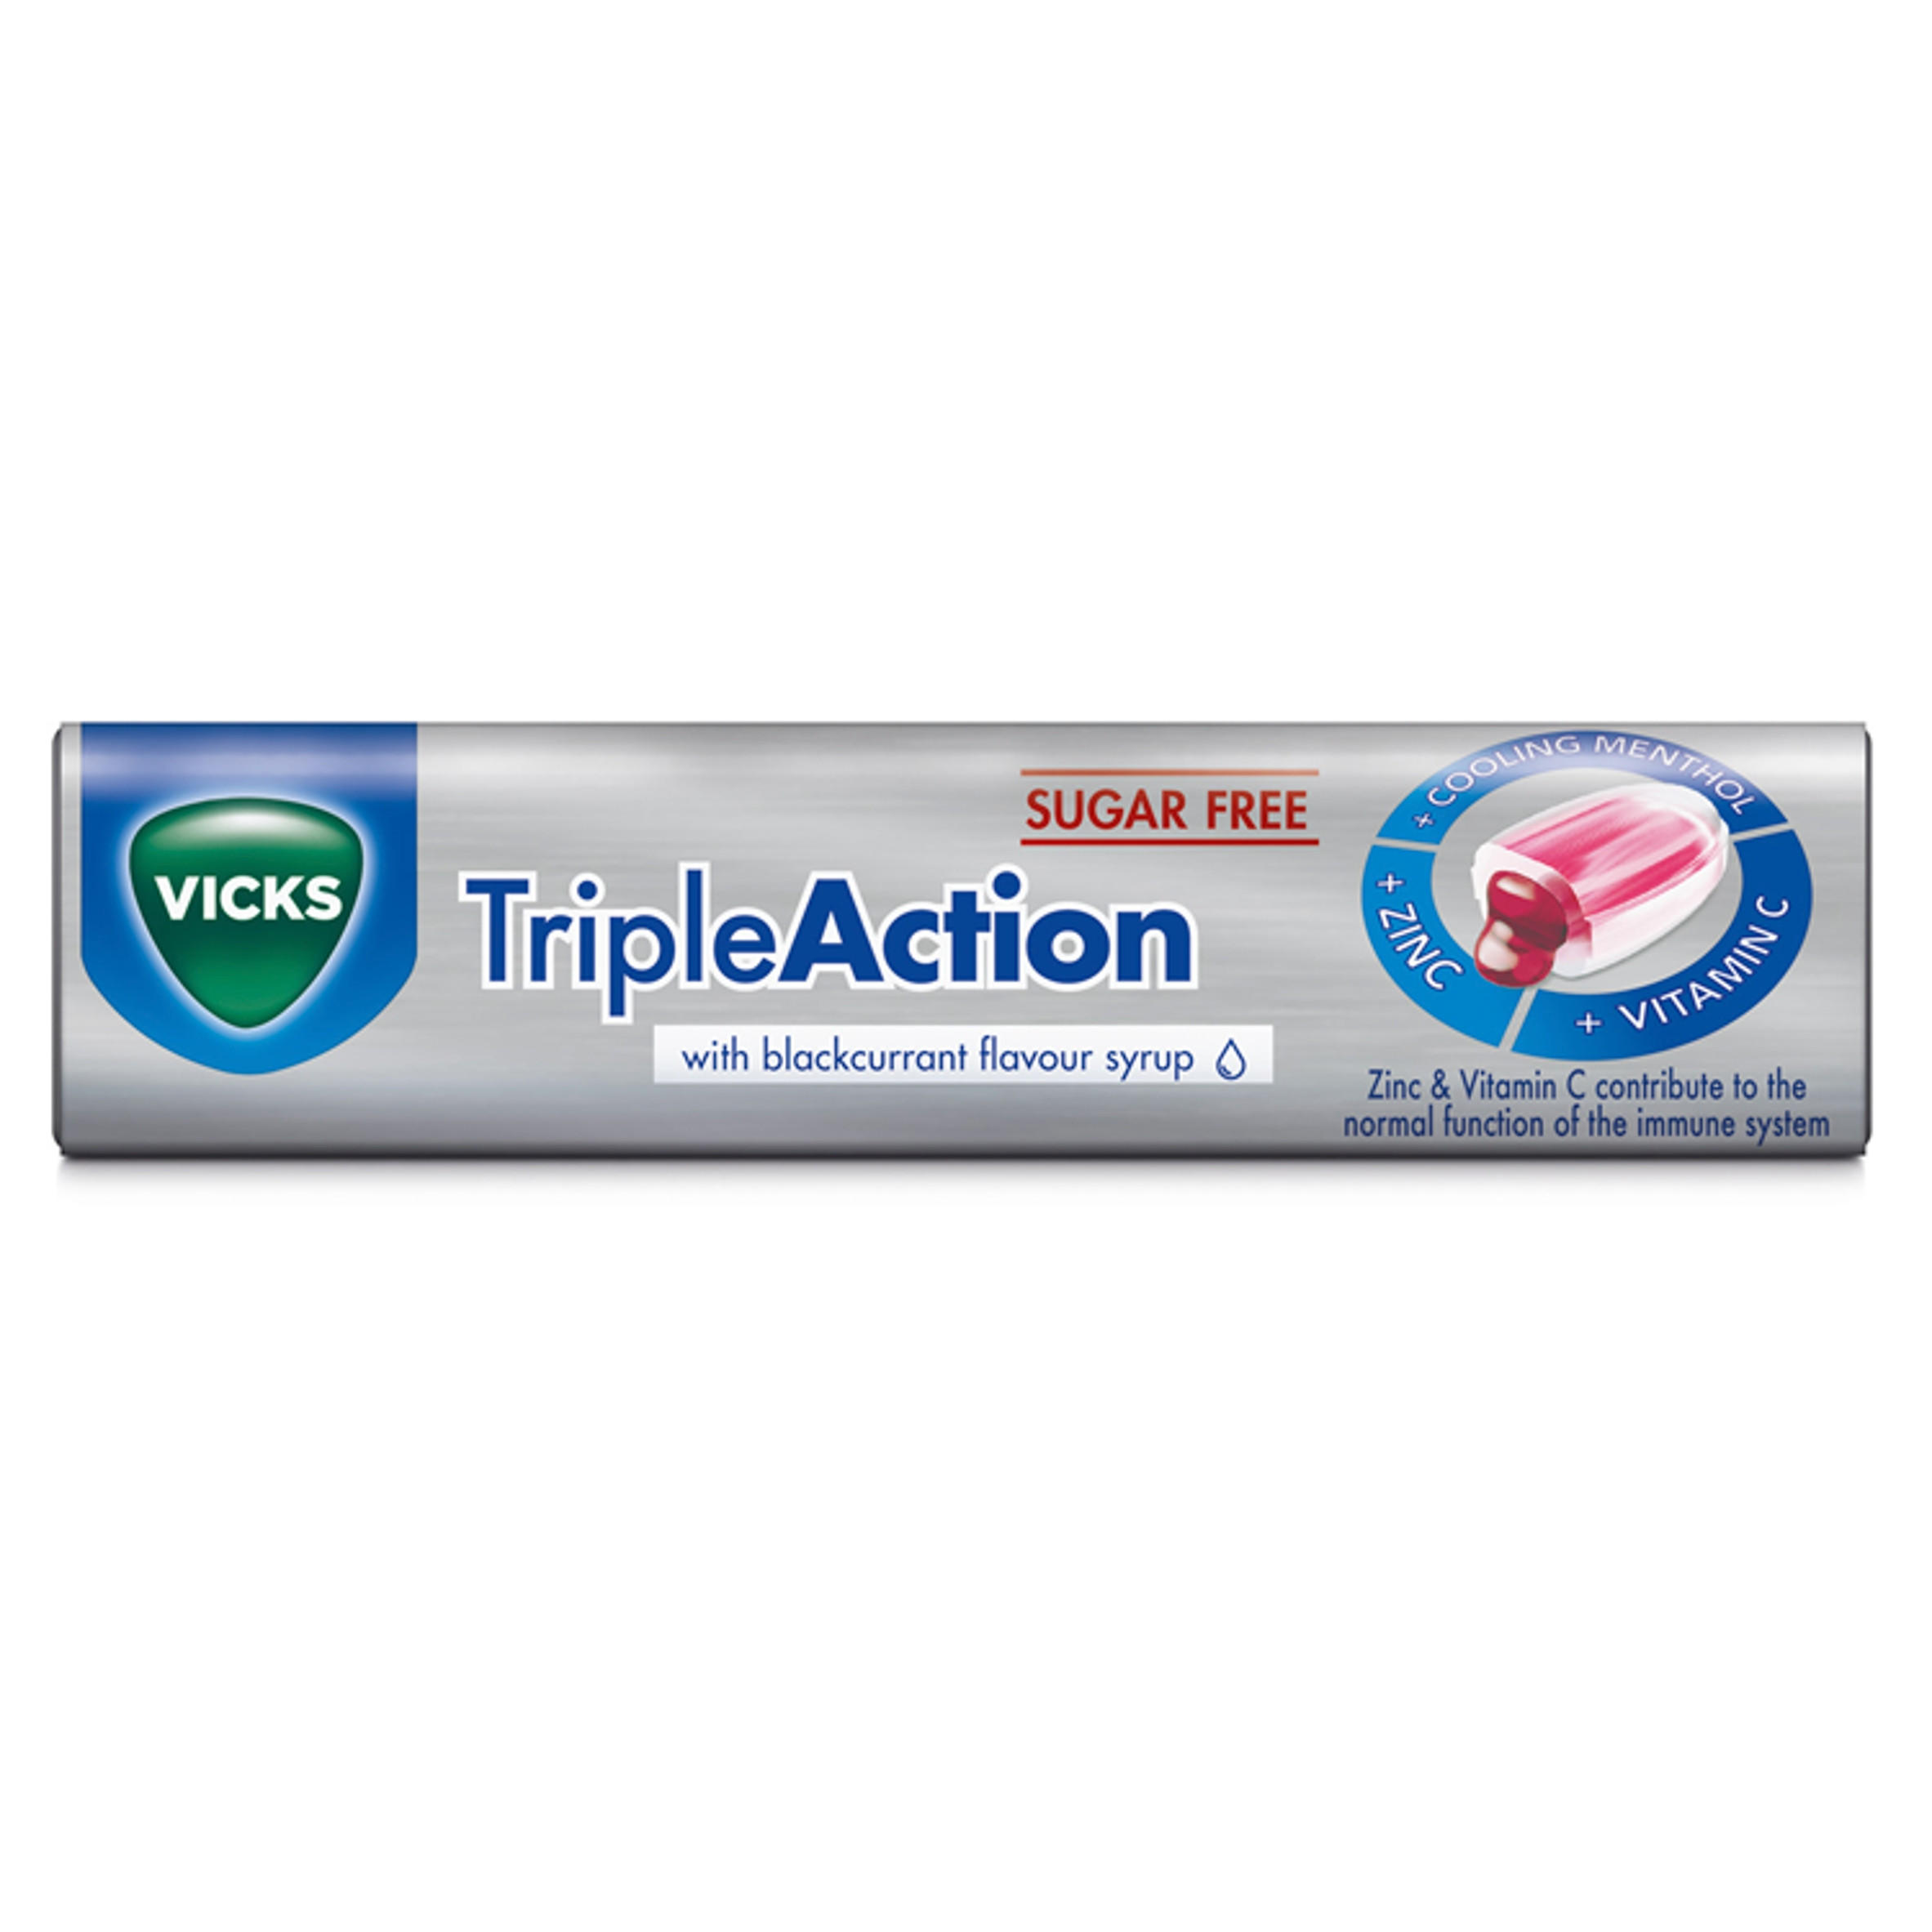 https://assets.iceland.co.uk/i/iceland/vicks_triple_action_sugar_free_with_vitamin_c_and_zinc_42g_87859_T596.jpg?$pdpzoom$